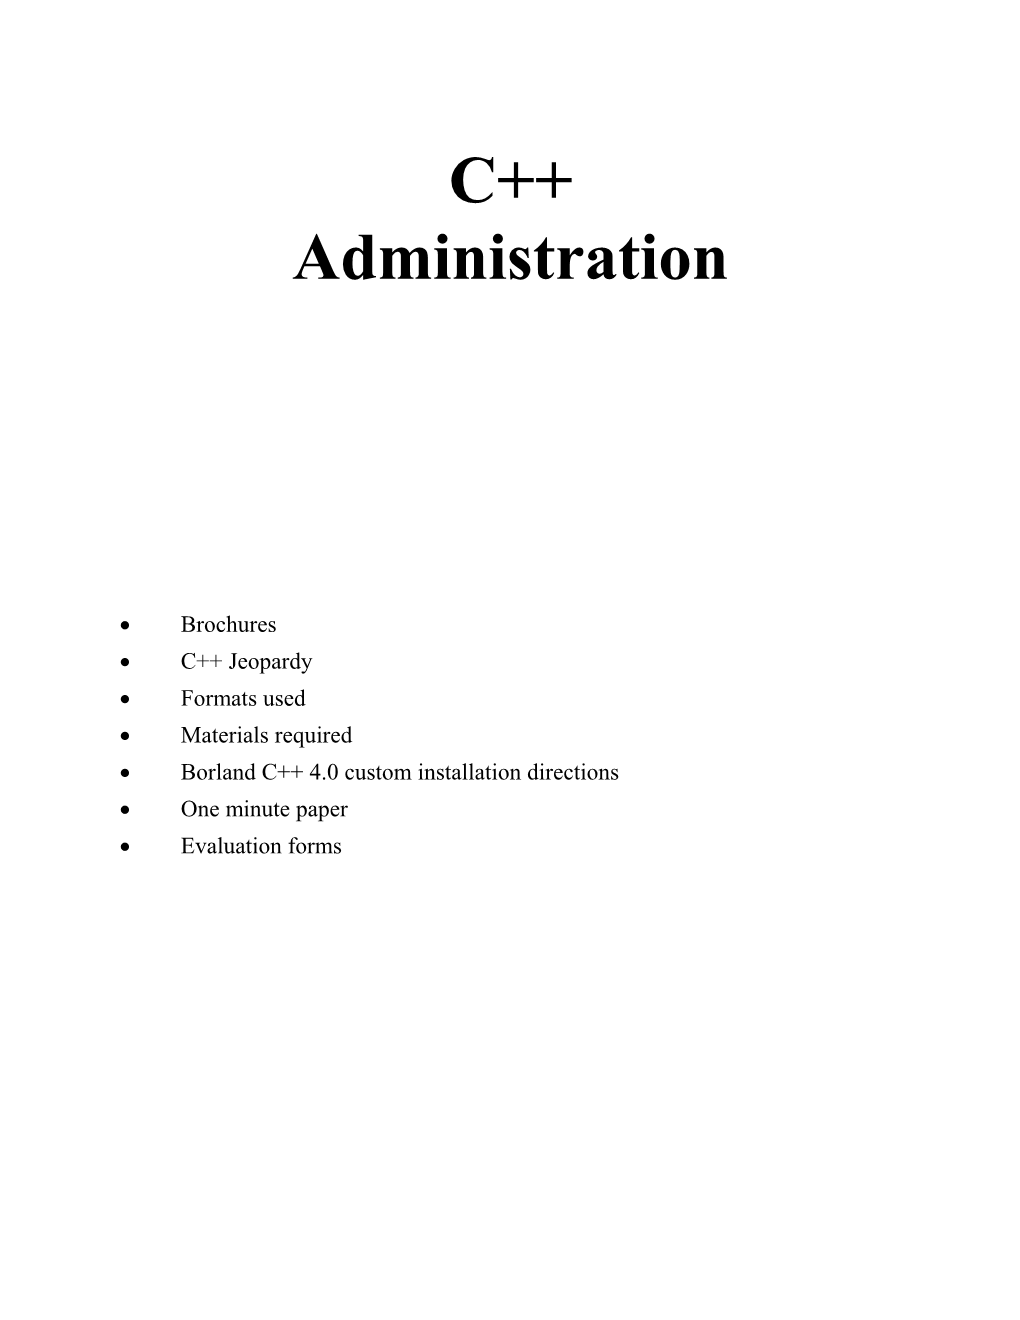 C Course Administration and Jeopardy Questions